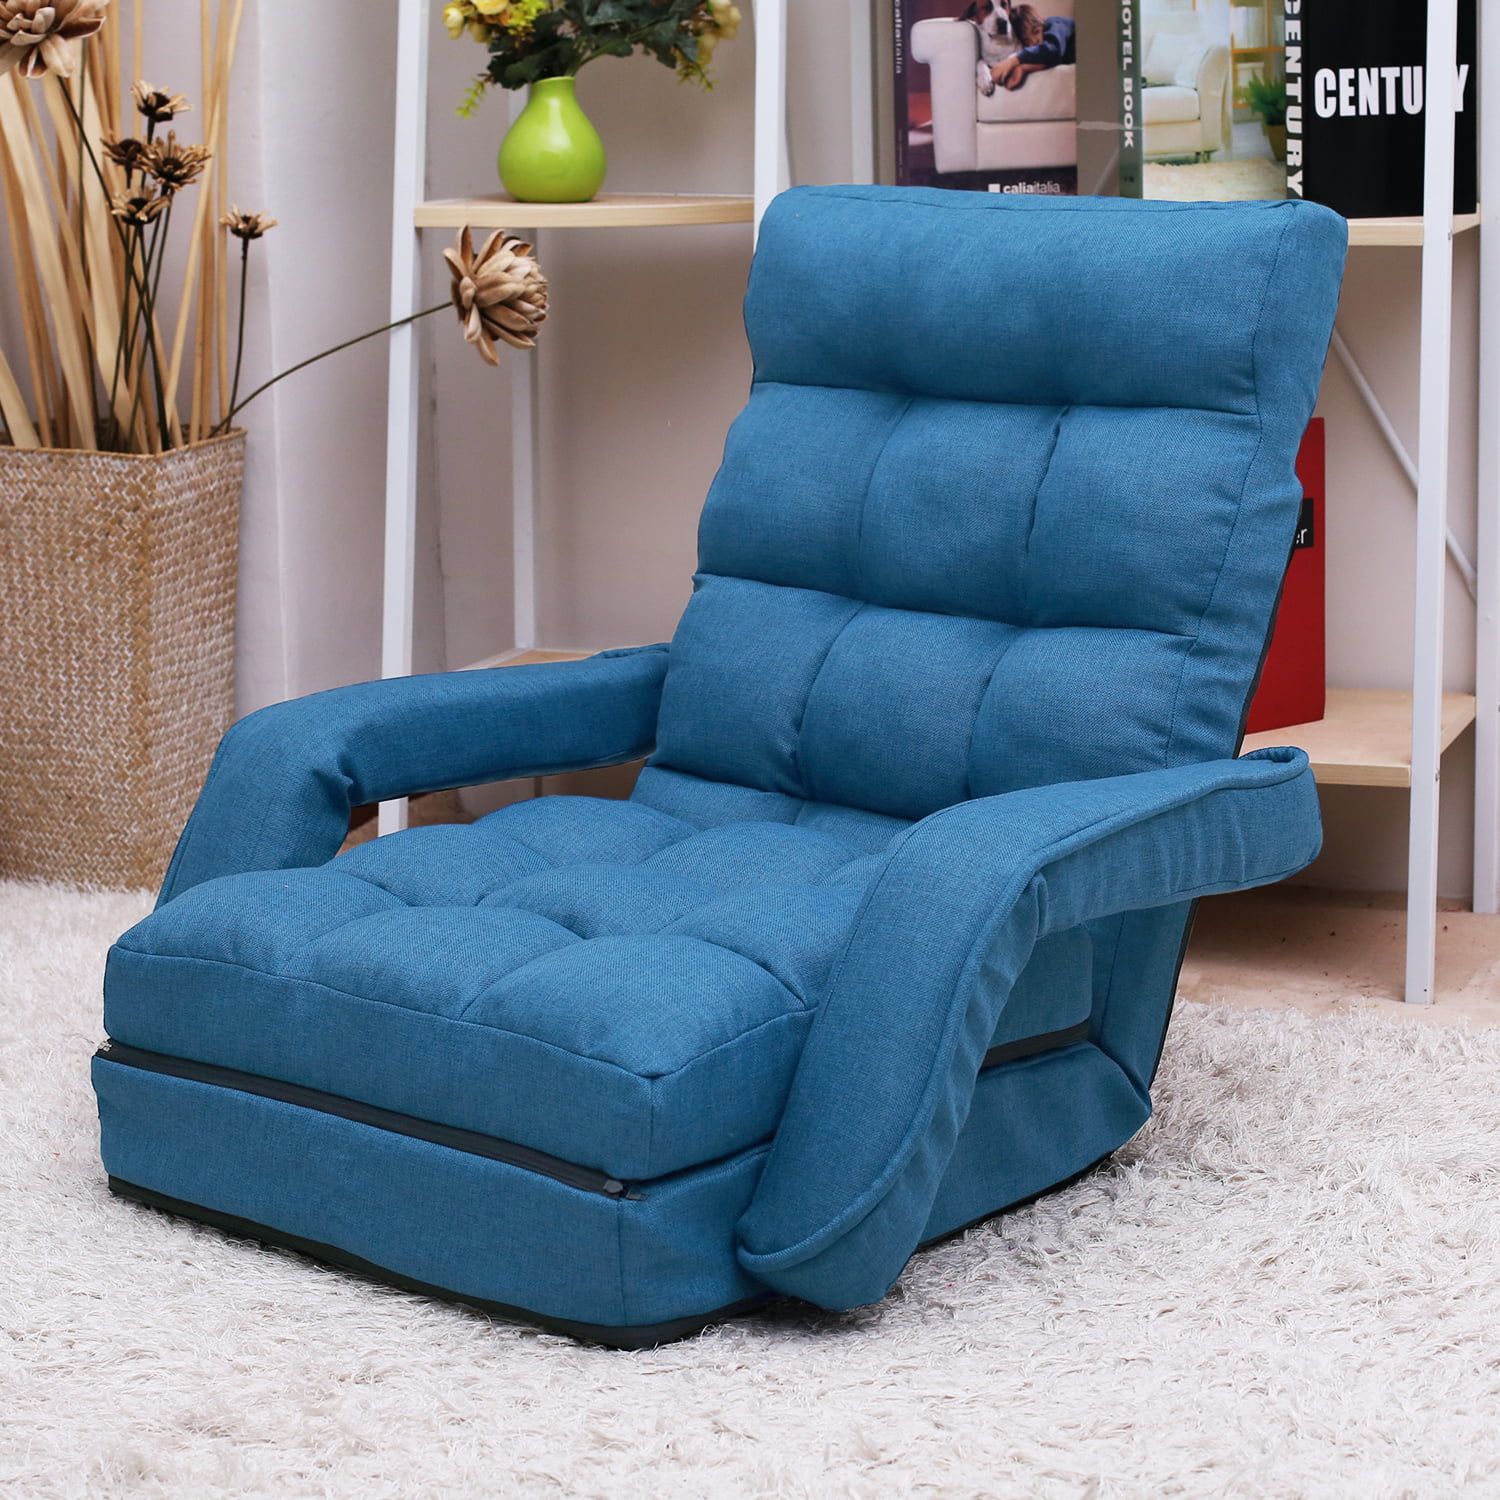 Furniture 2 In 1 Folding Lazy Sofa Lounger Floor Gaming Armchair Bed With 2 In 1 Foldable Sofas (View 9 of 20)